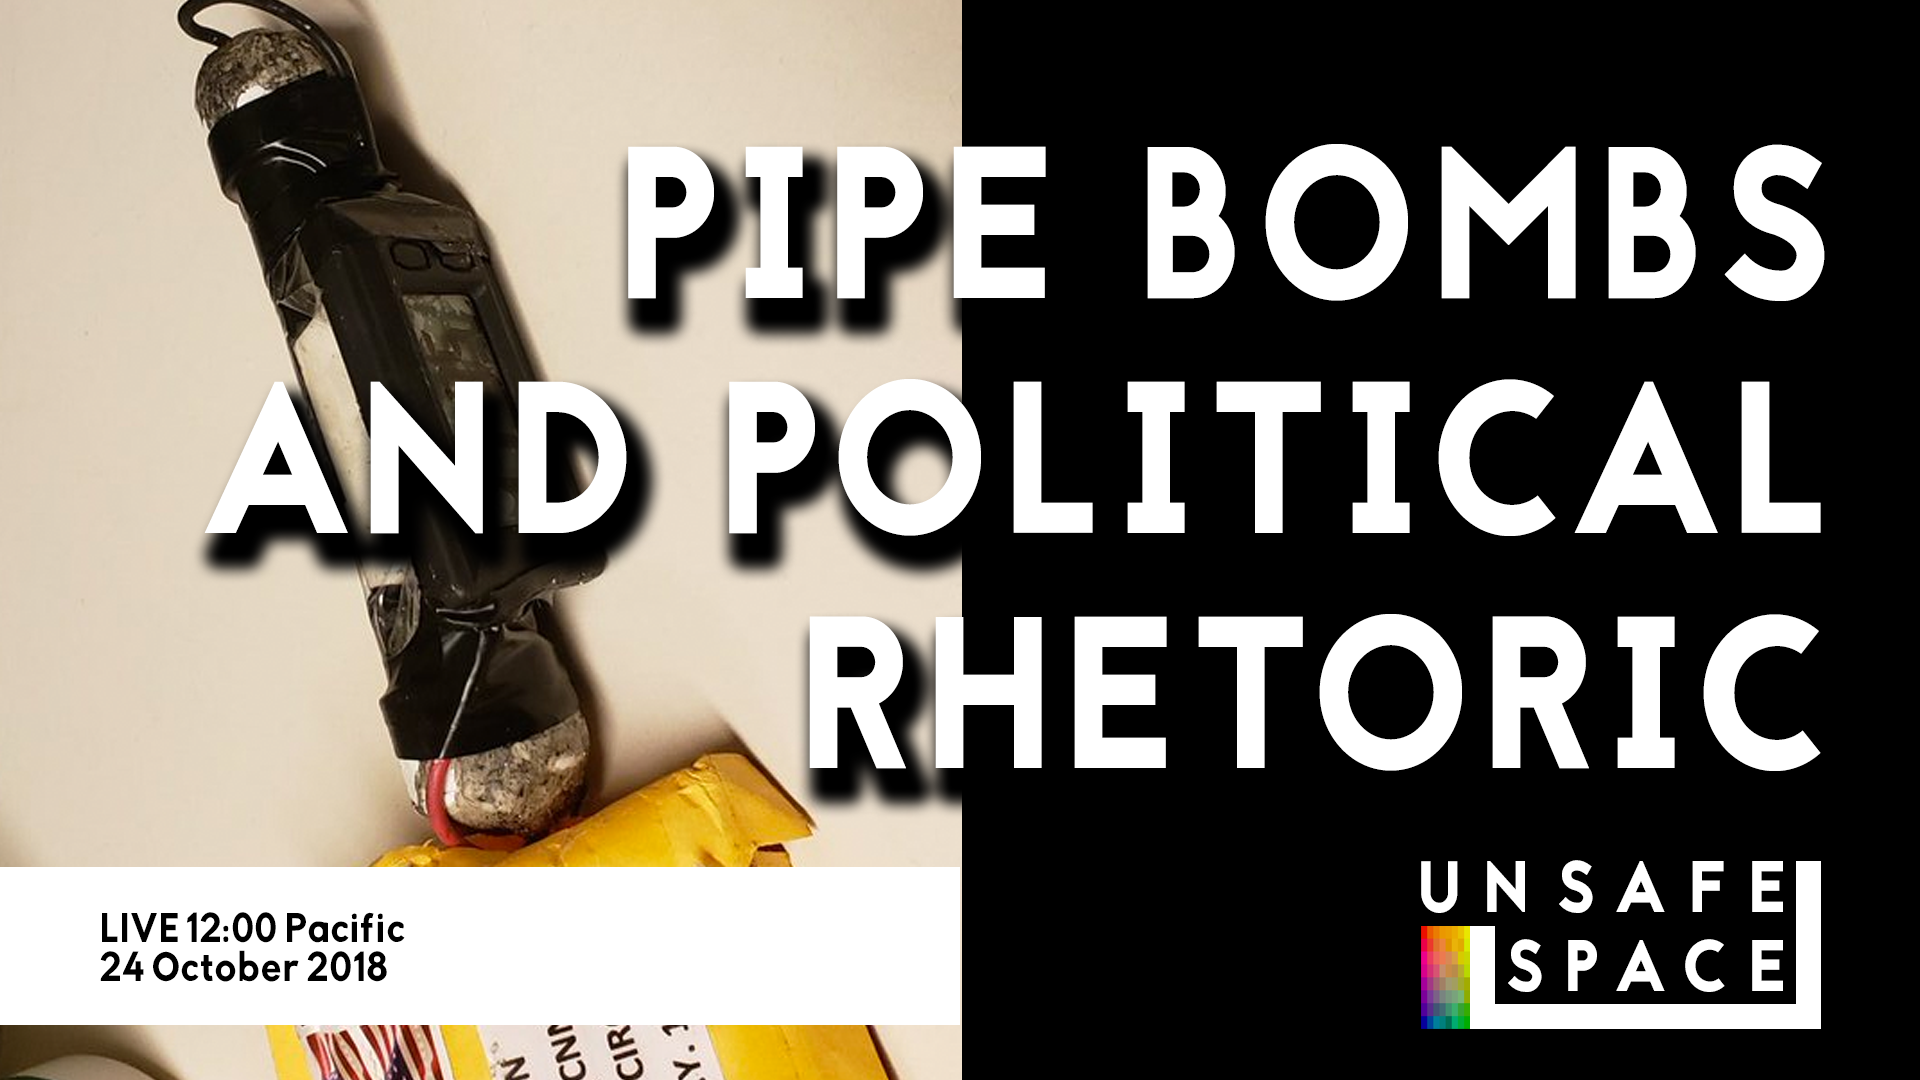 [Episode 024] Pipe bombs and Political Rhetoric!